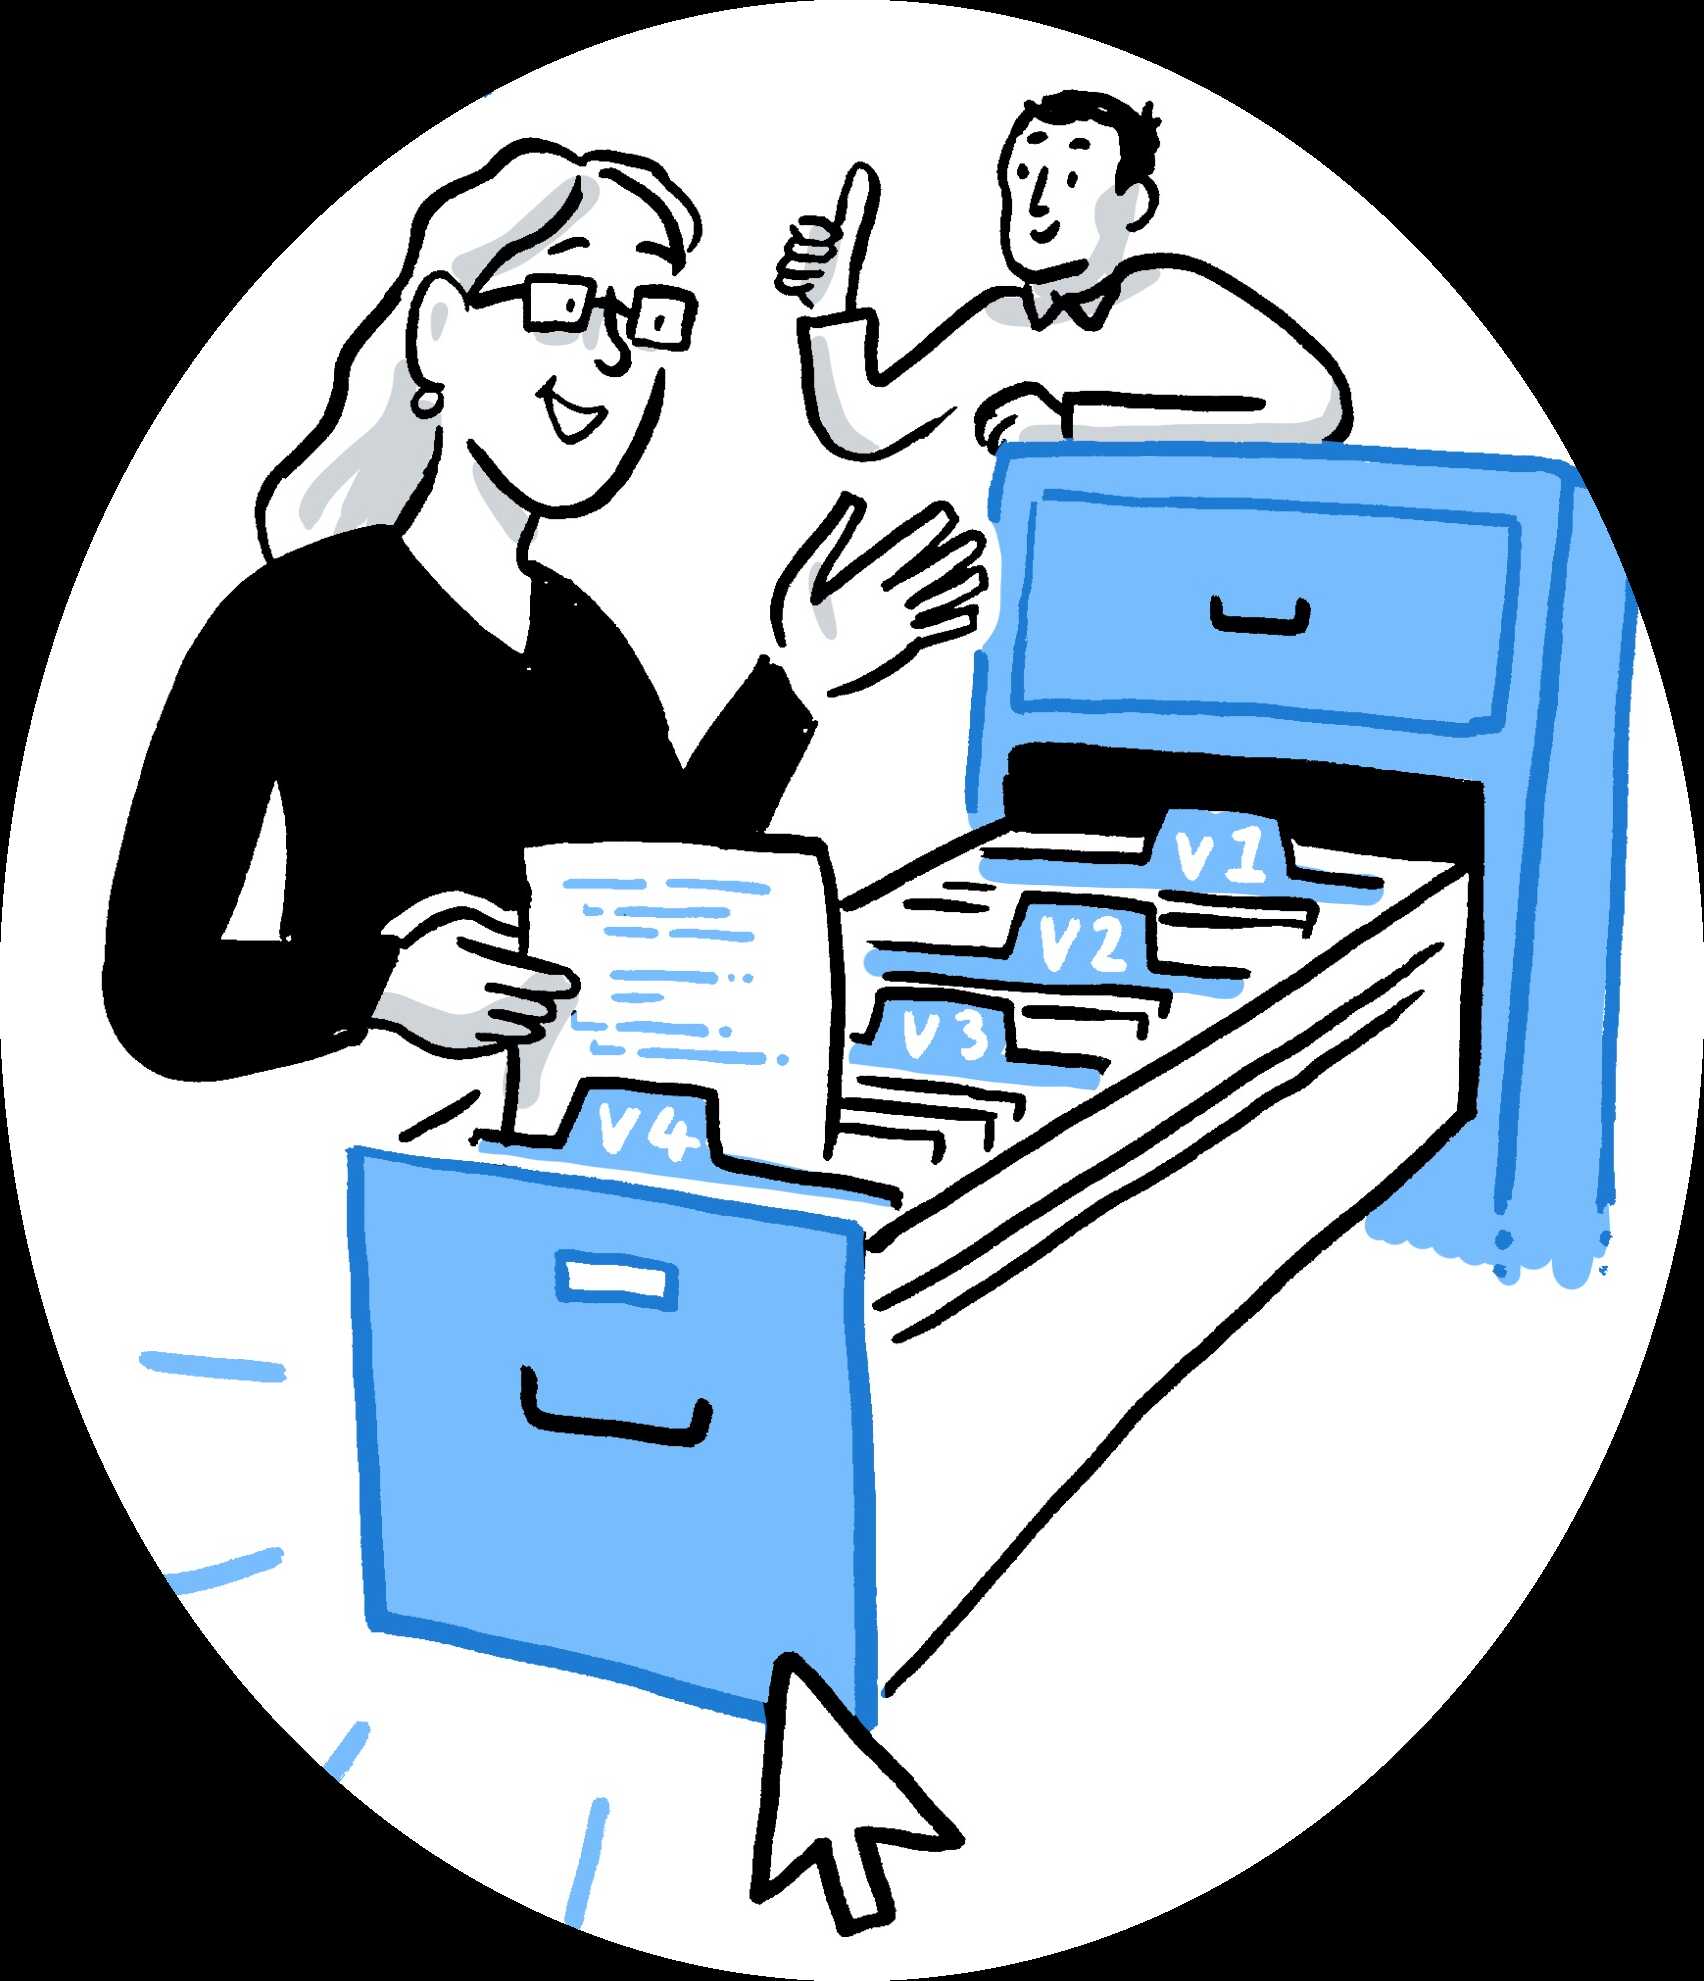 Cartoon-like sketch of a woman looking through a big file drawer, where documents are arranged systematically indicated by versions. She is smiling and waving at her colleague who is standing next to the file drawer and seem to be checking if everything is ok - gesturing a thumbs-up.